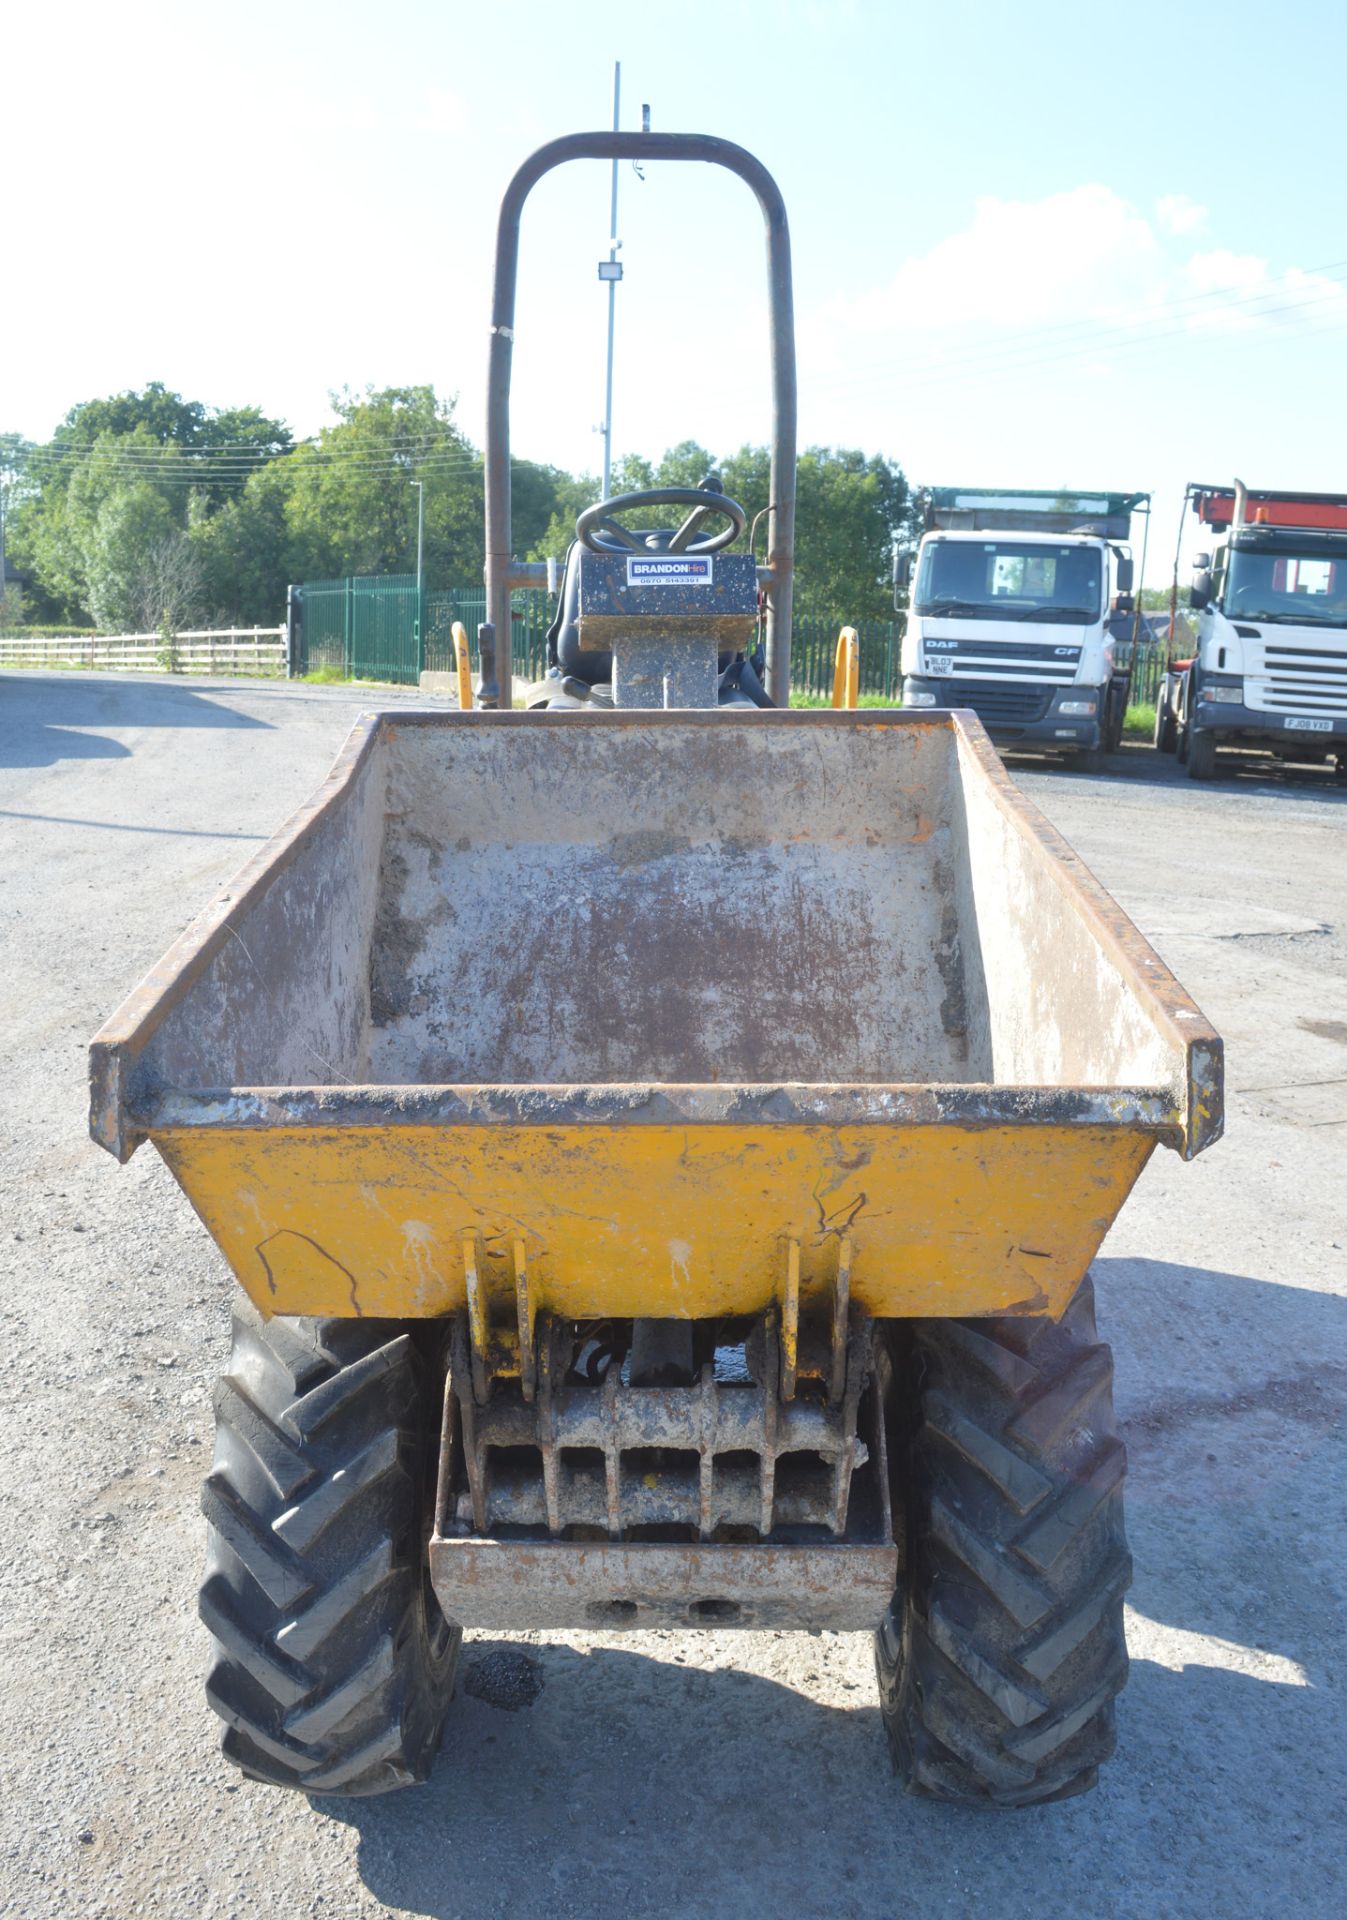 Benford Terex HD1000 high tip dumper  Year: 2003  S/N: E309HM375 Recorded hours: Clock blank - Image 5 of 11